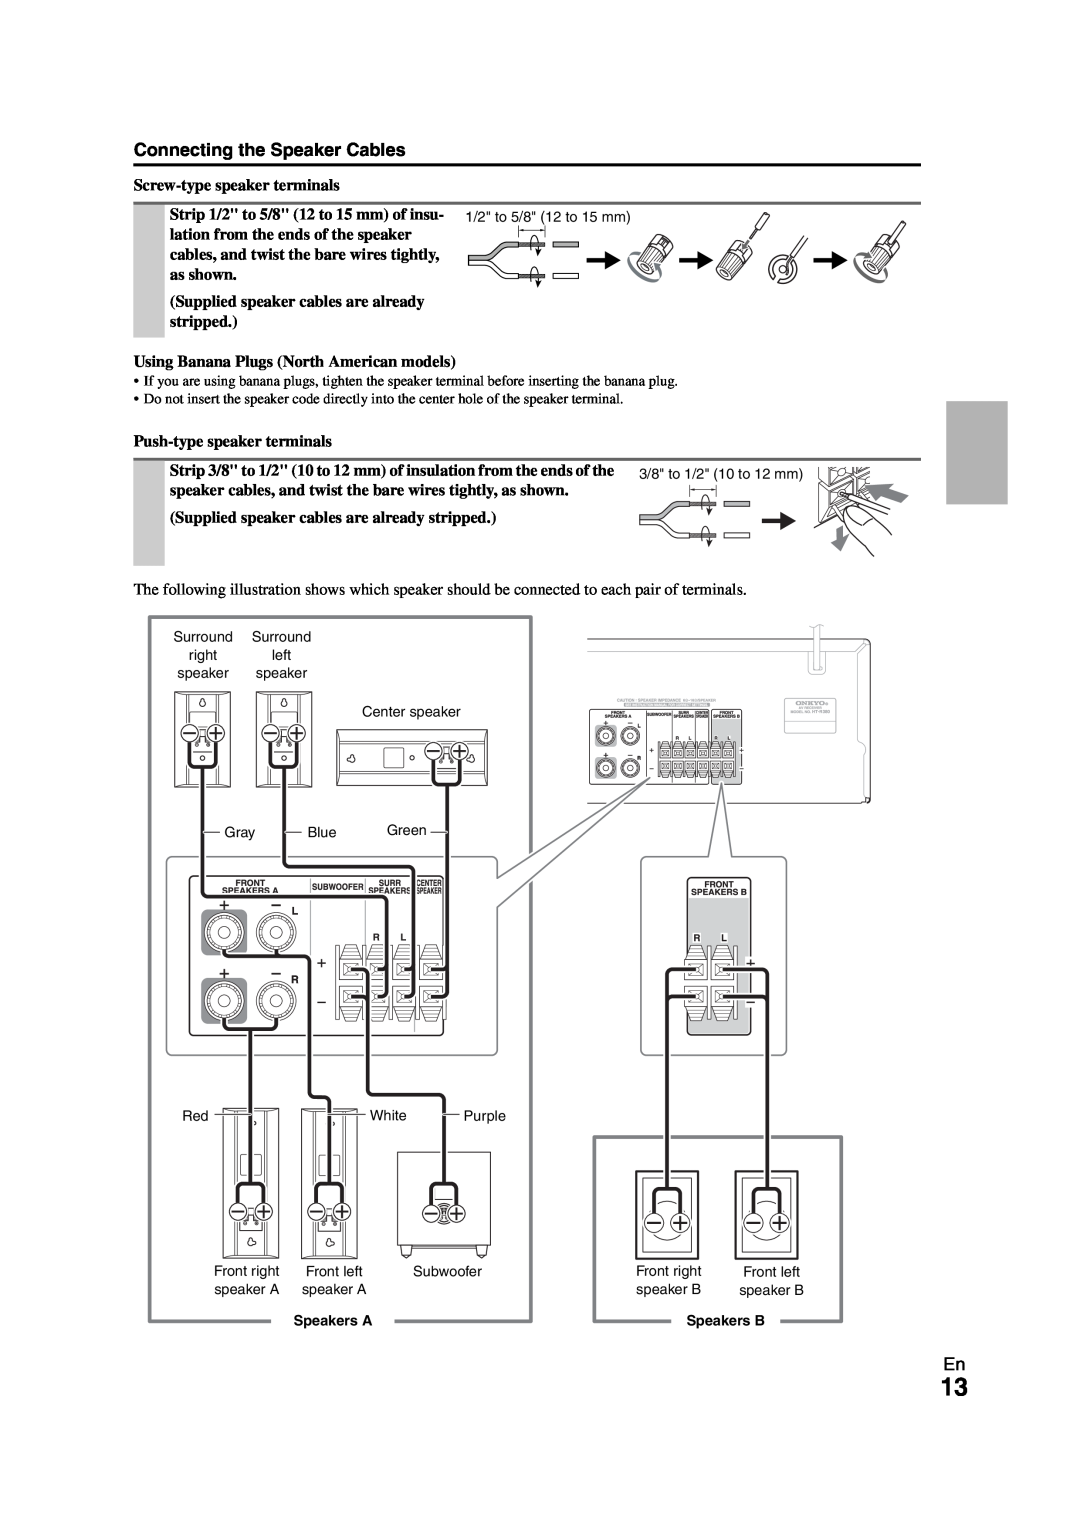 Onkyo HT-S3300 instruction manual Connecting the Speaker Cables, Screw-typespeaker terminals 